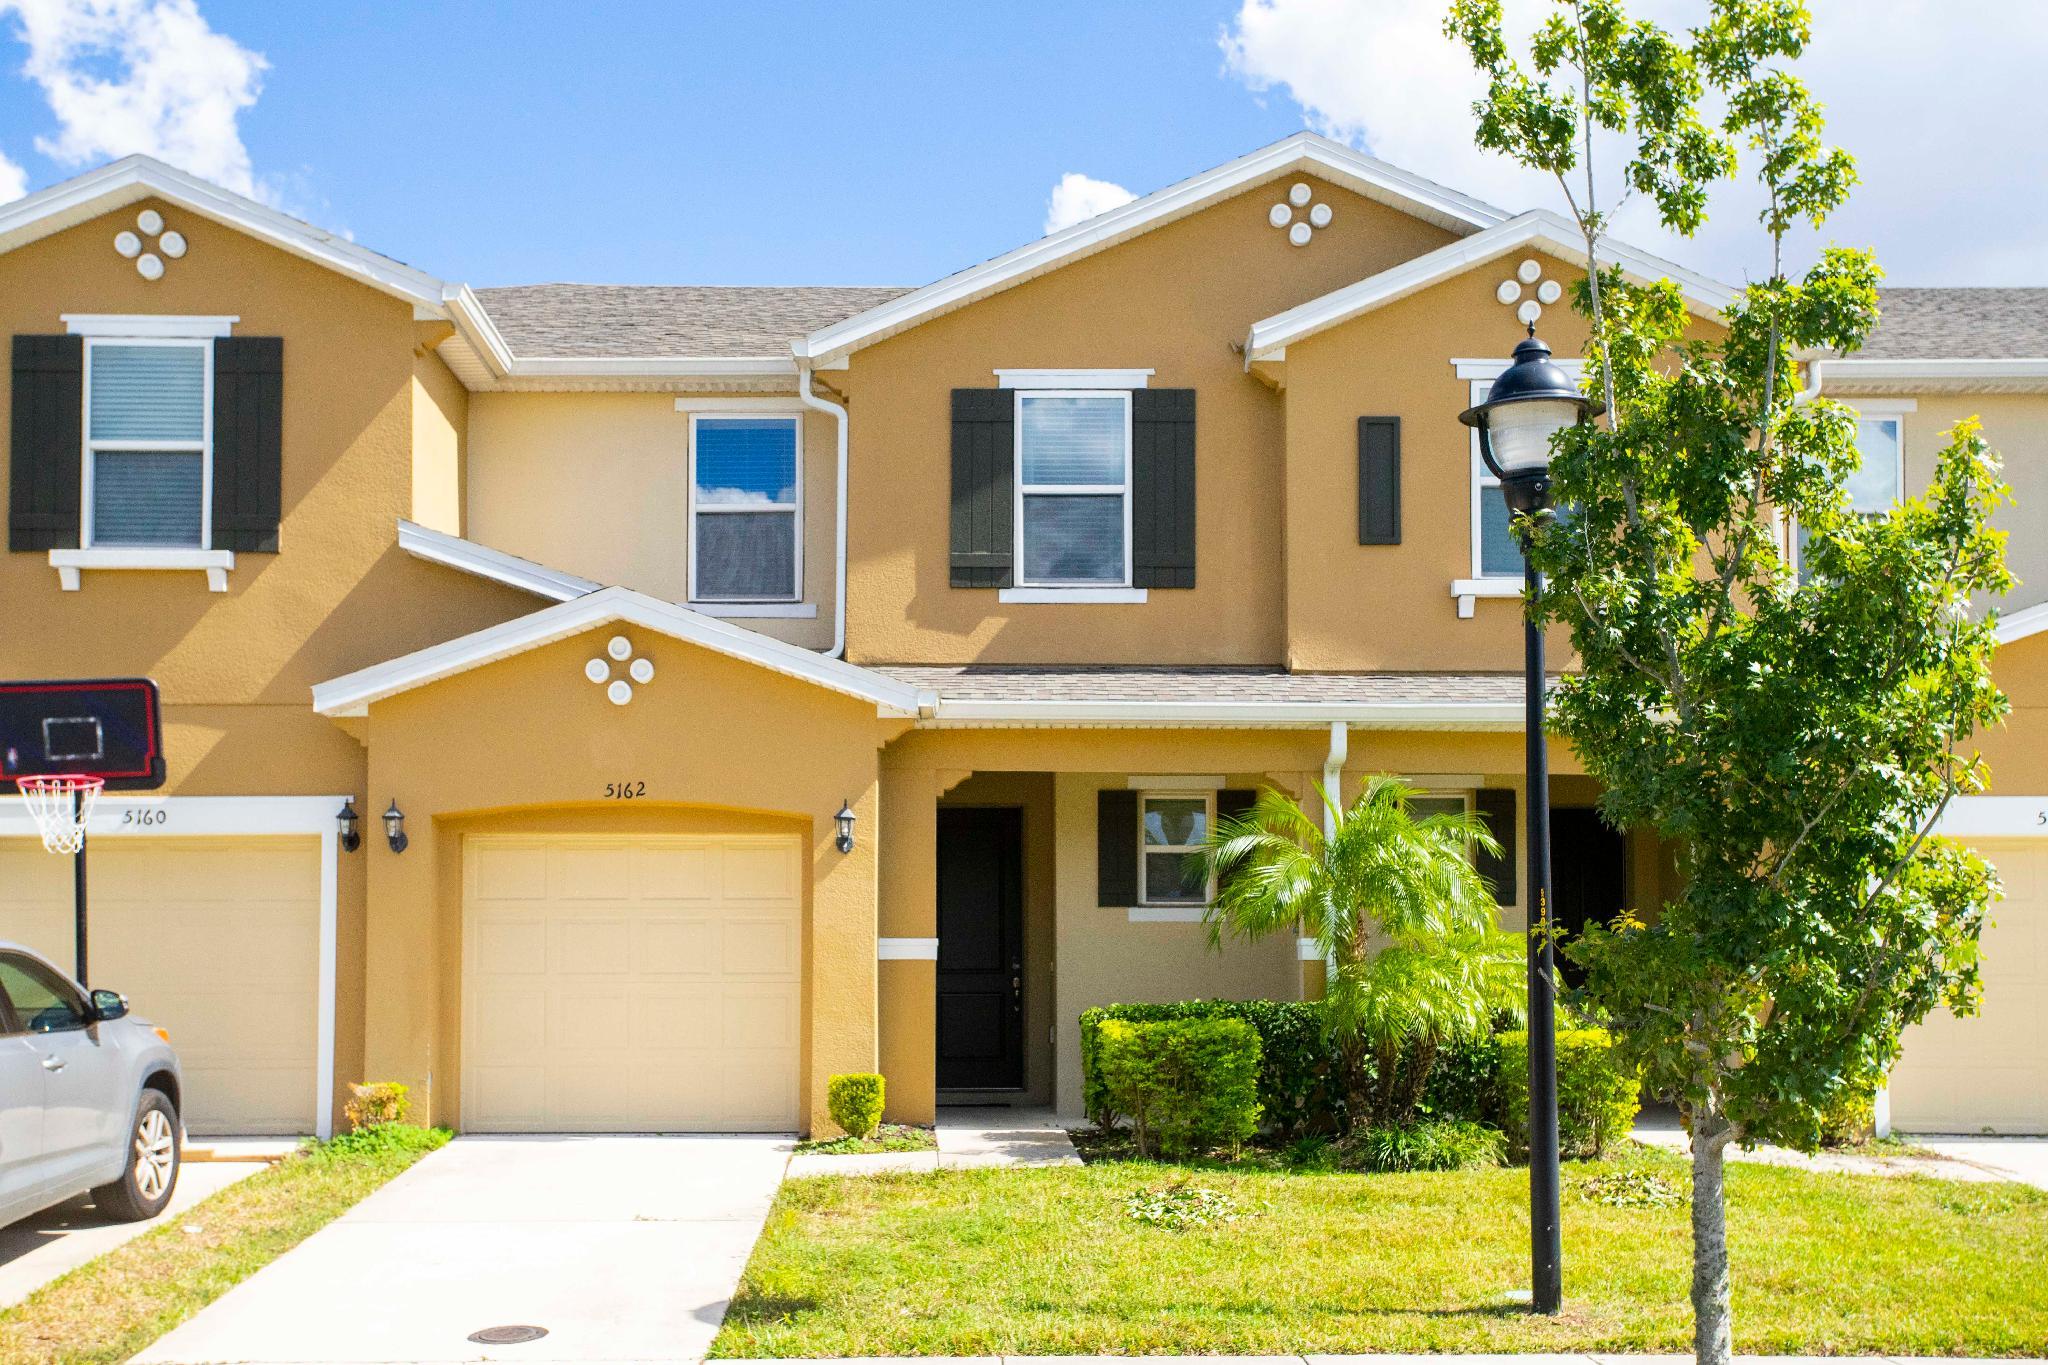 Four Bedrooms Townhome Close To Disney 5162a - Celebration, FL